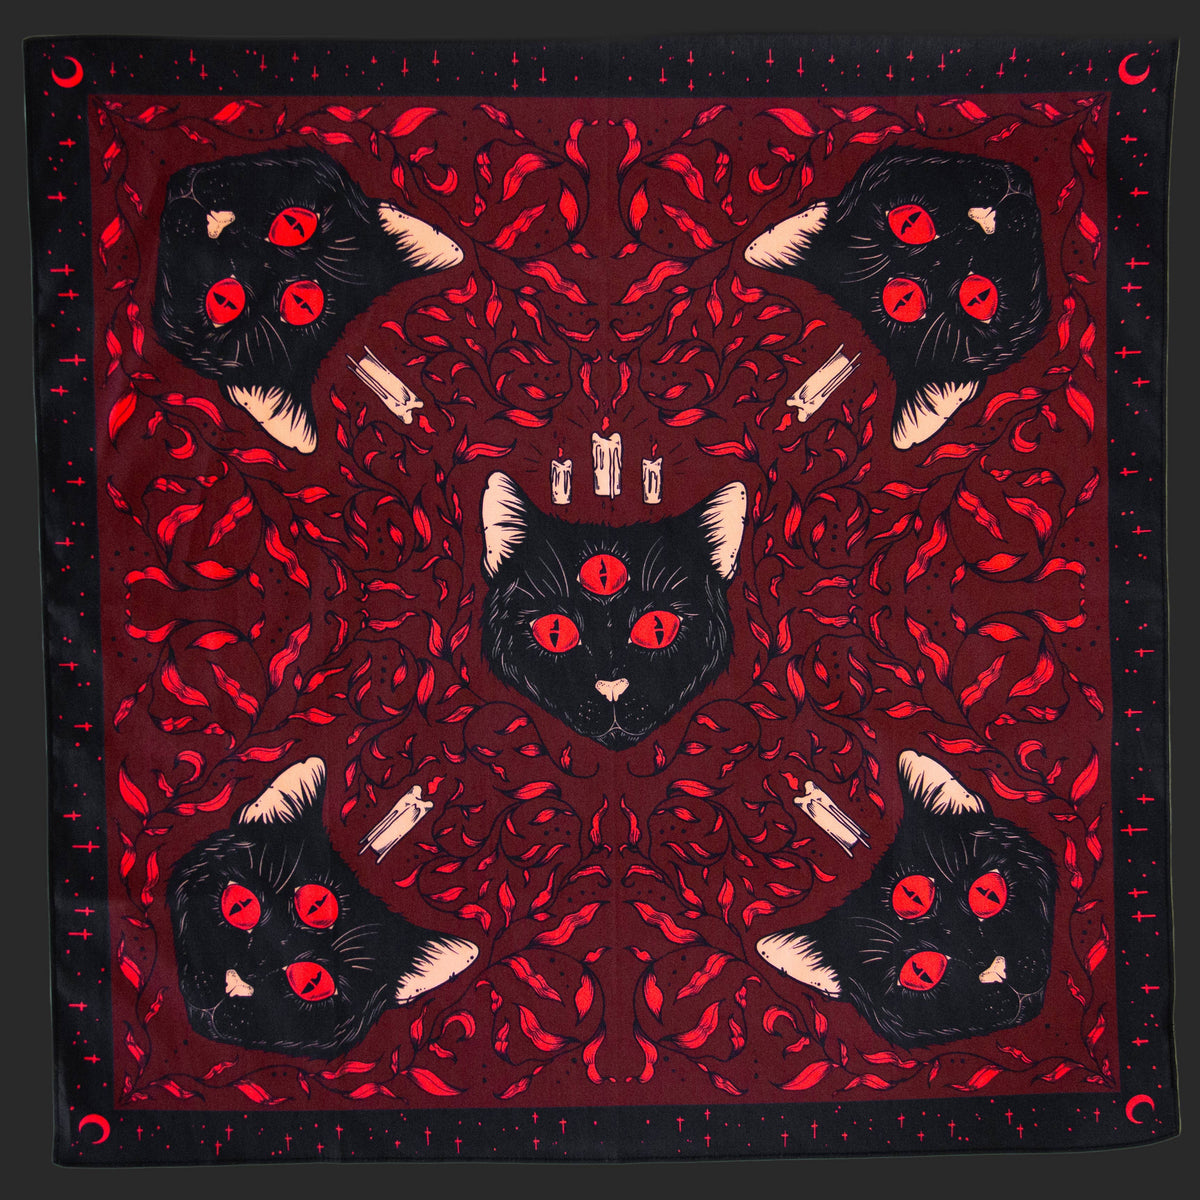 Witchy Black Cat Altar Cloth, Wall Hanging, Bandana: Red